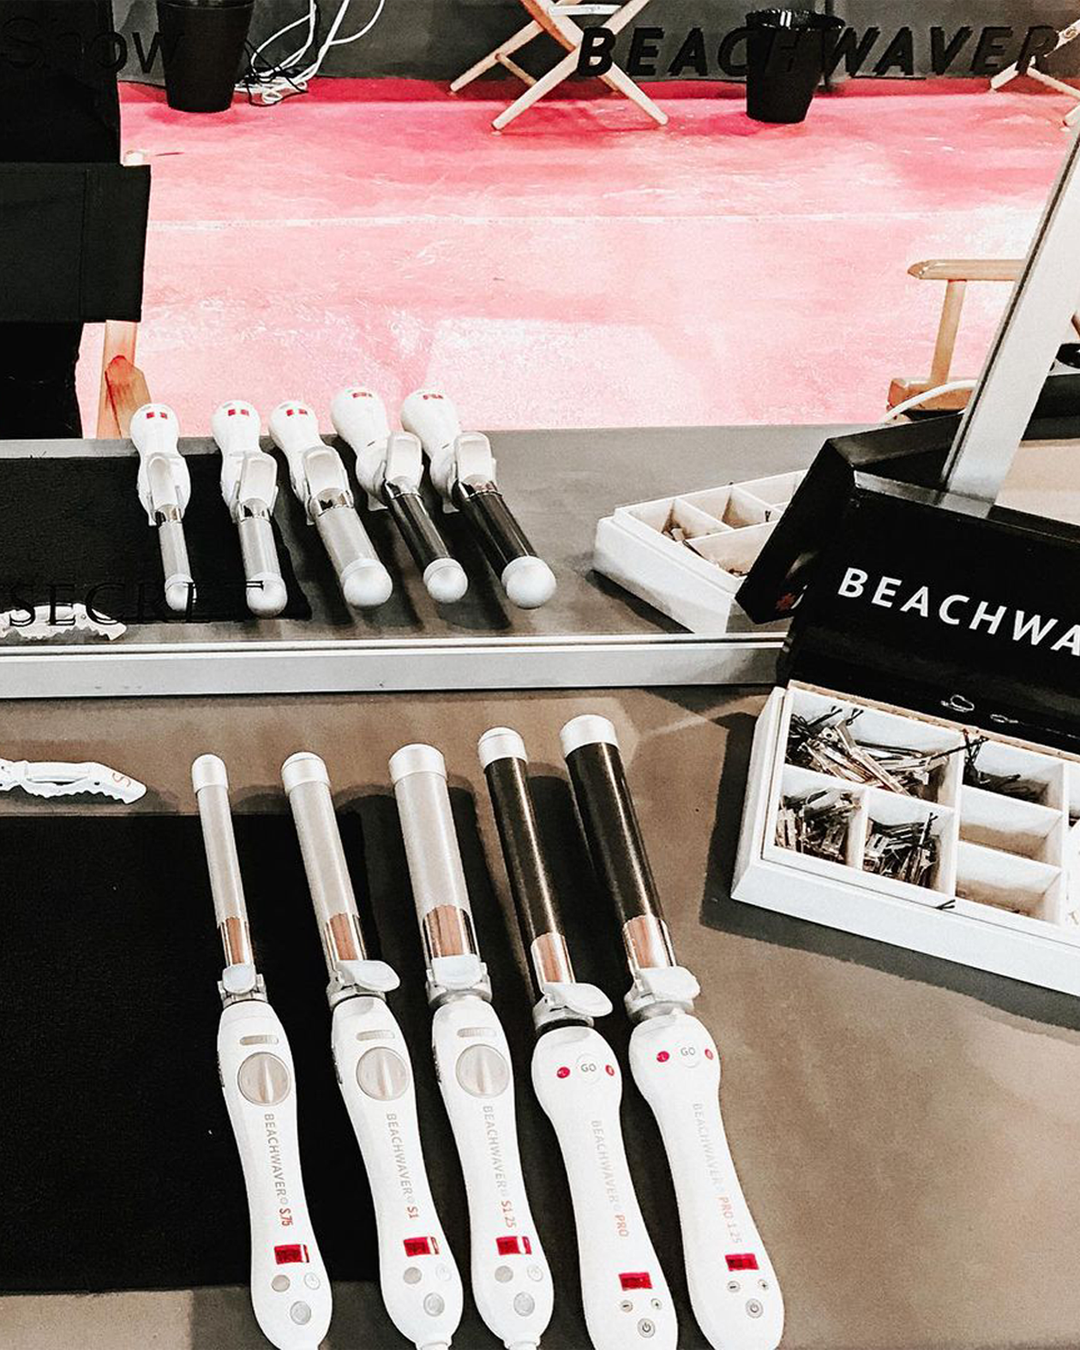 Image of Beachwaver tools lined up in a line backstage.